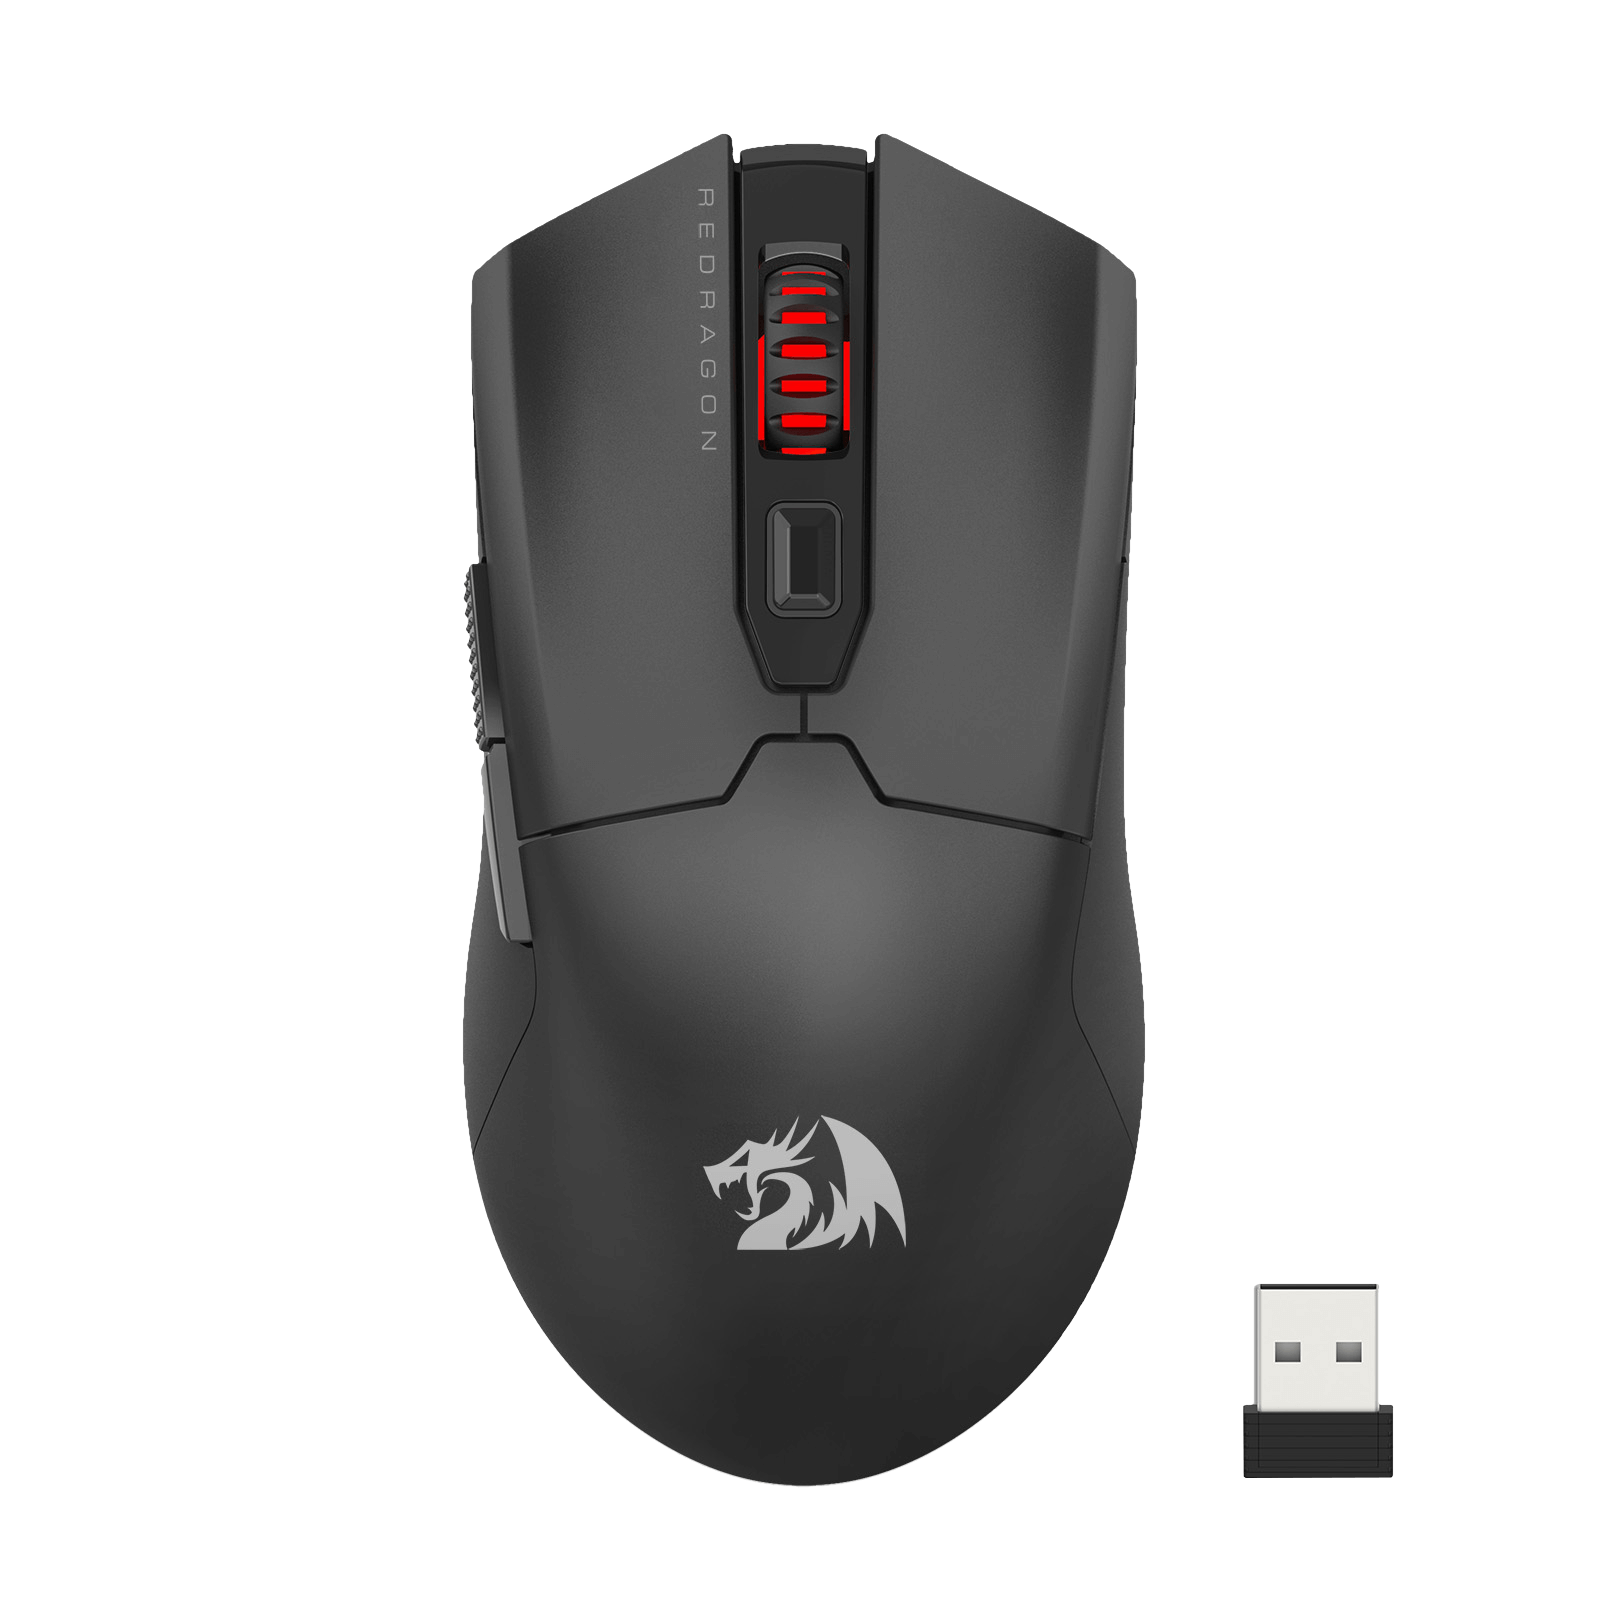 Redragon FYZU M995 BT/2.4G/Wired Tri-mode Gaming Mouse | show